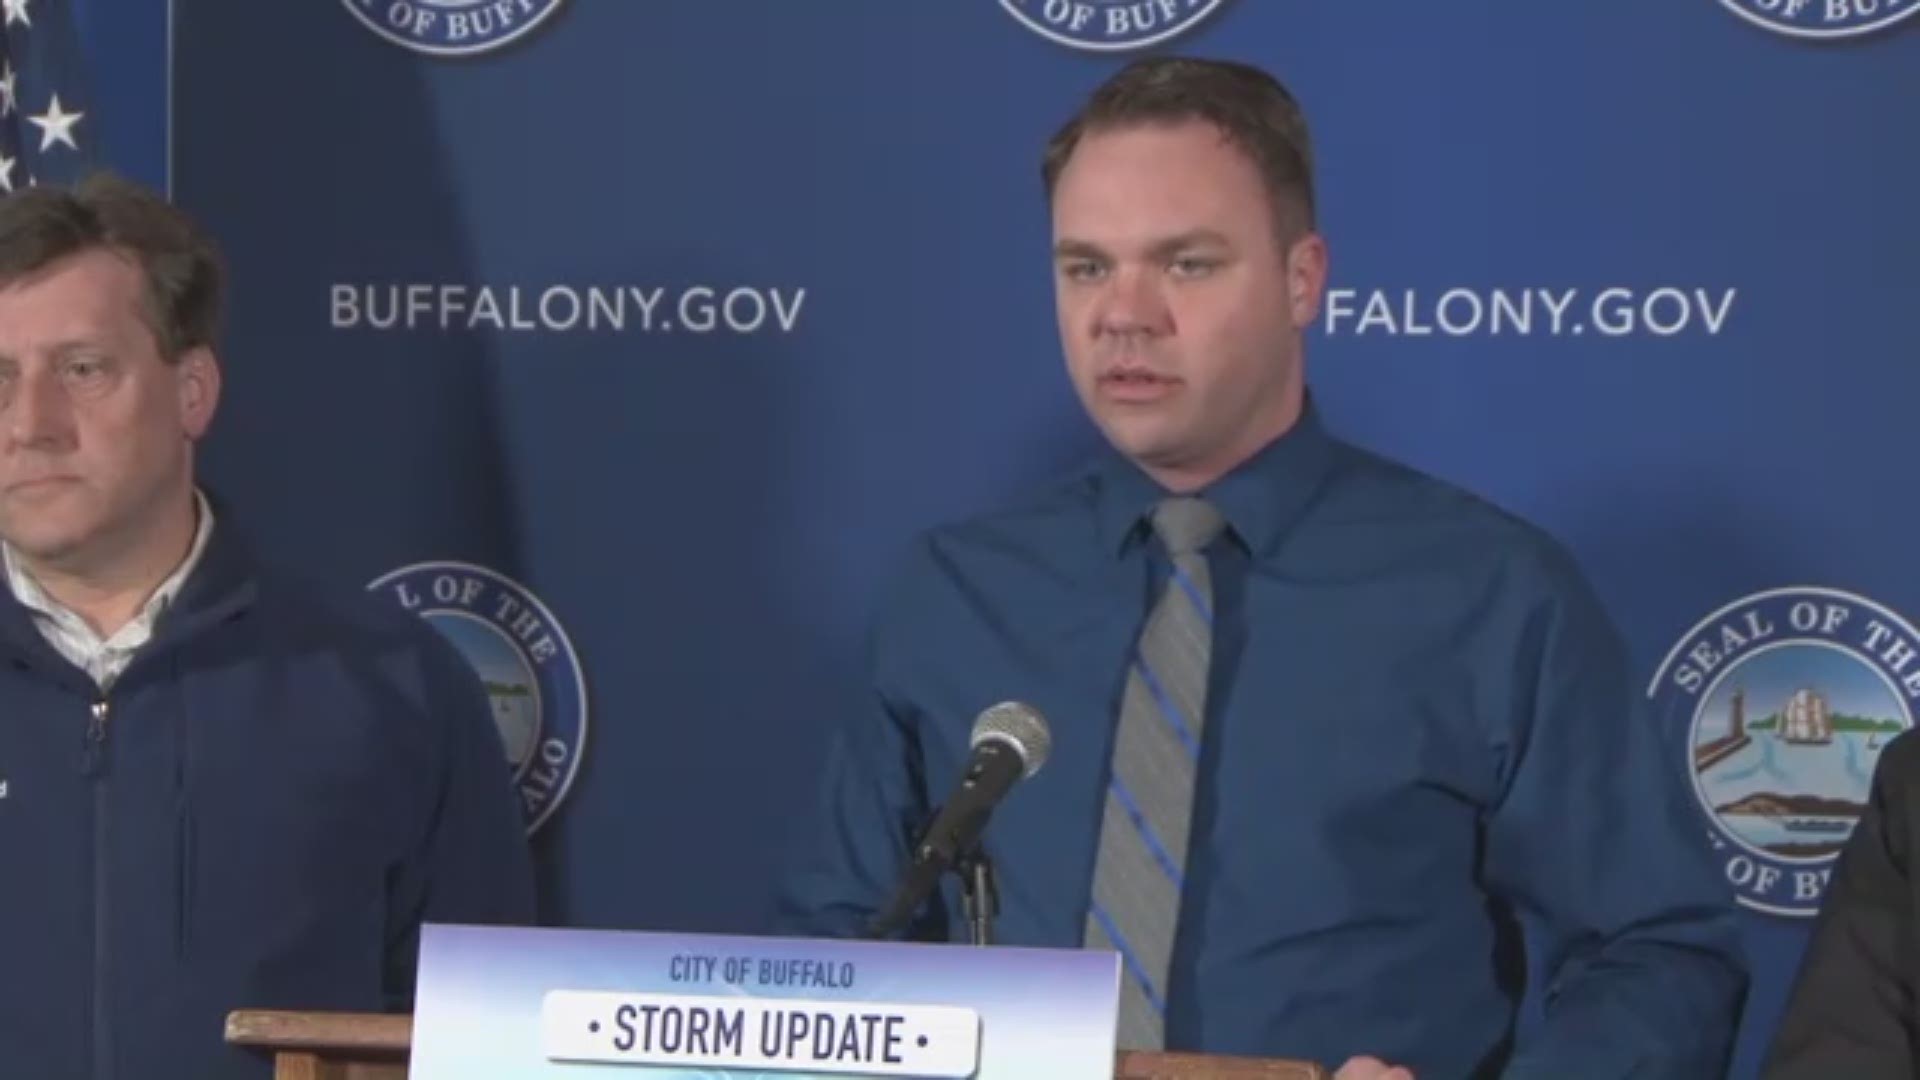 The City of Buffalo is prepped and ready to handle the latest winter storm.